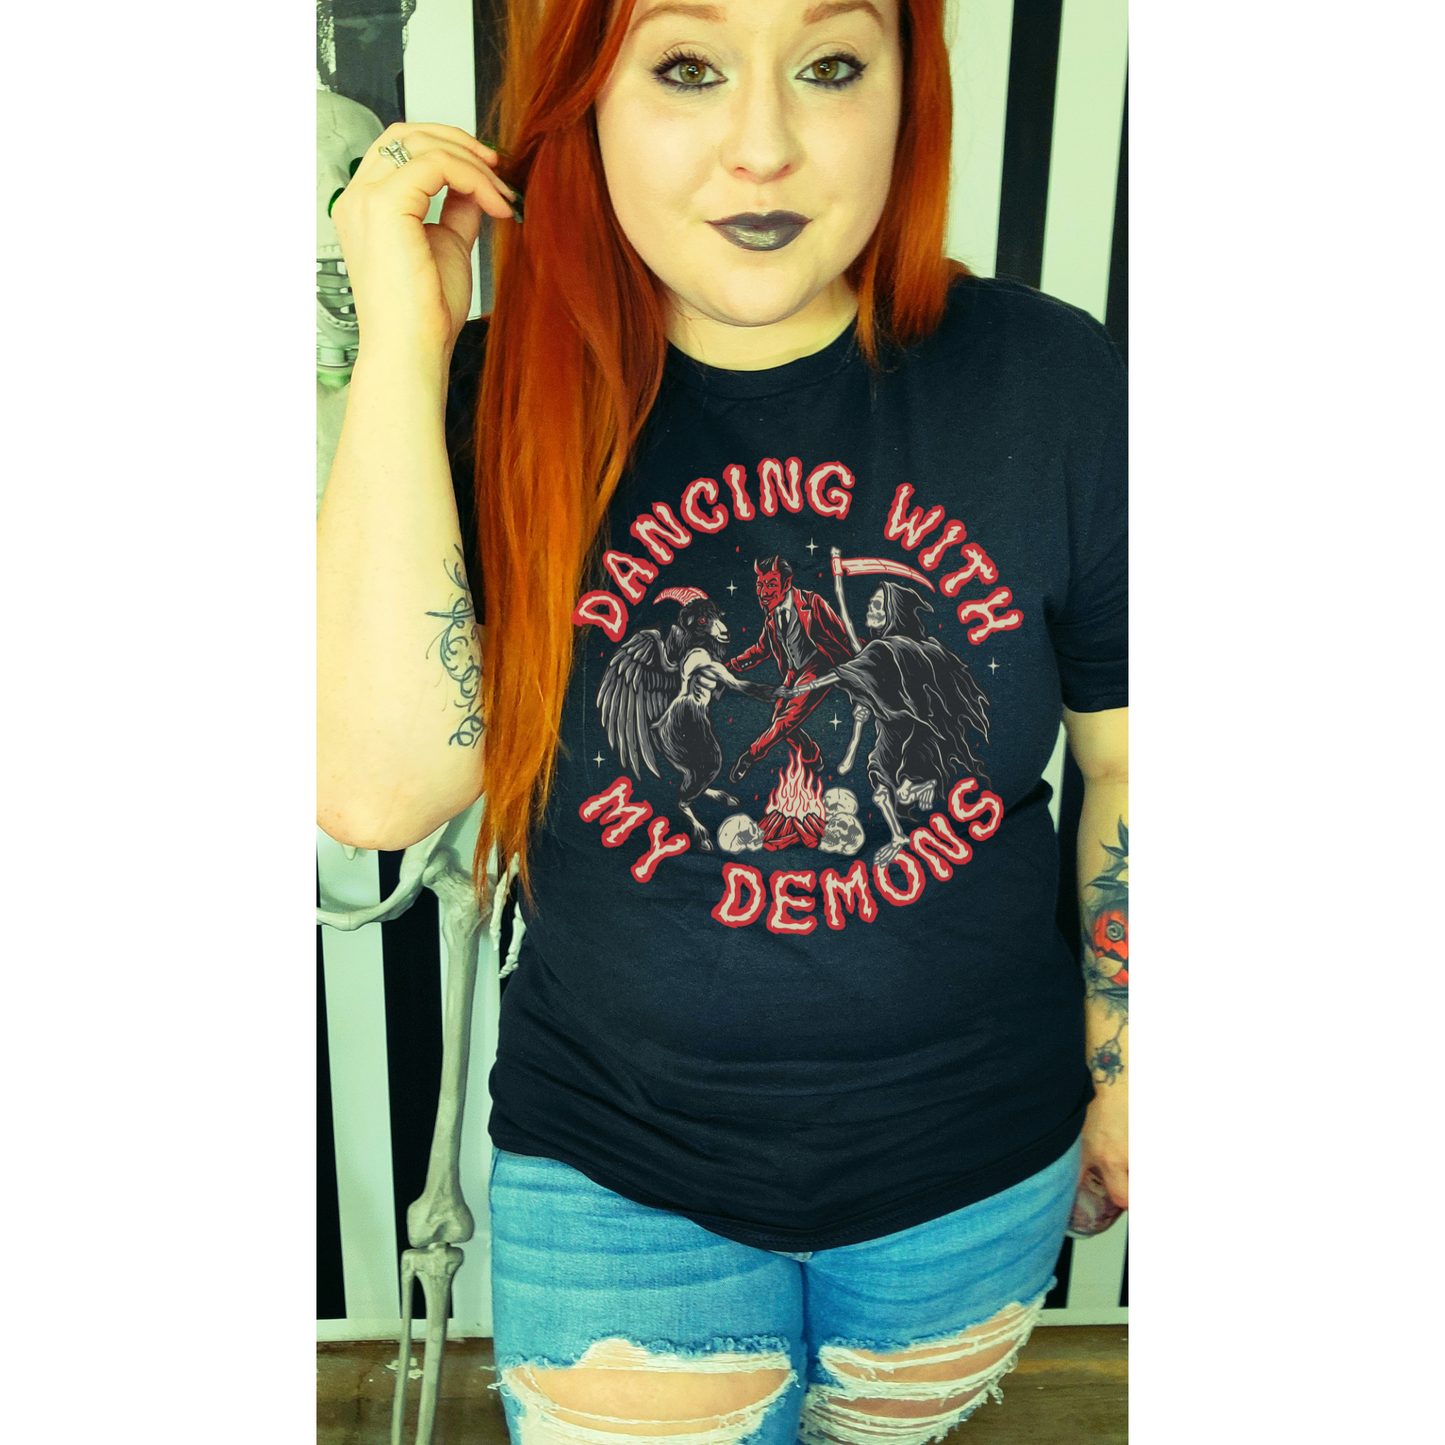 Dancing with my demons T-shirt